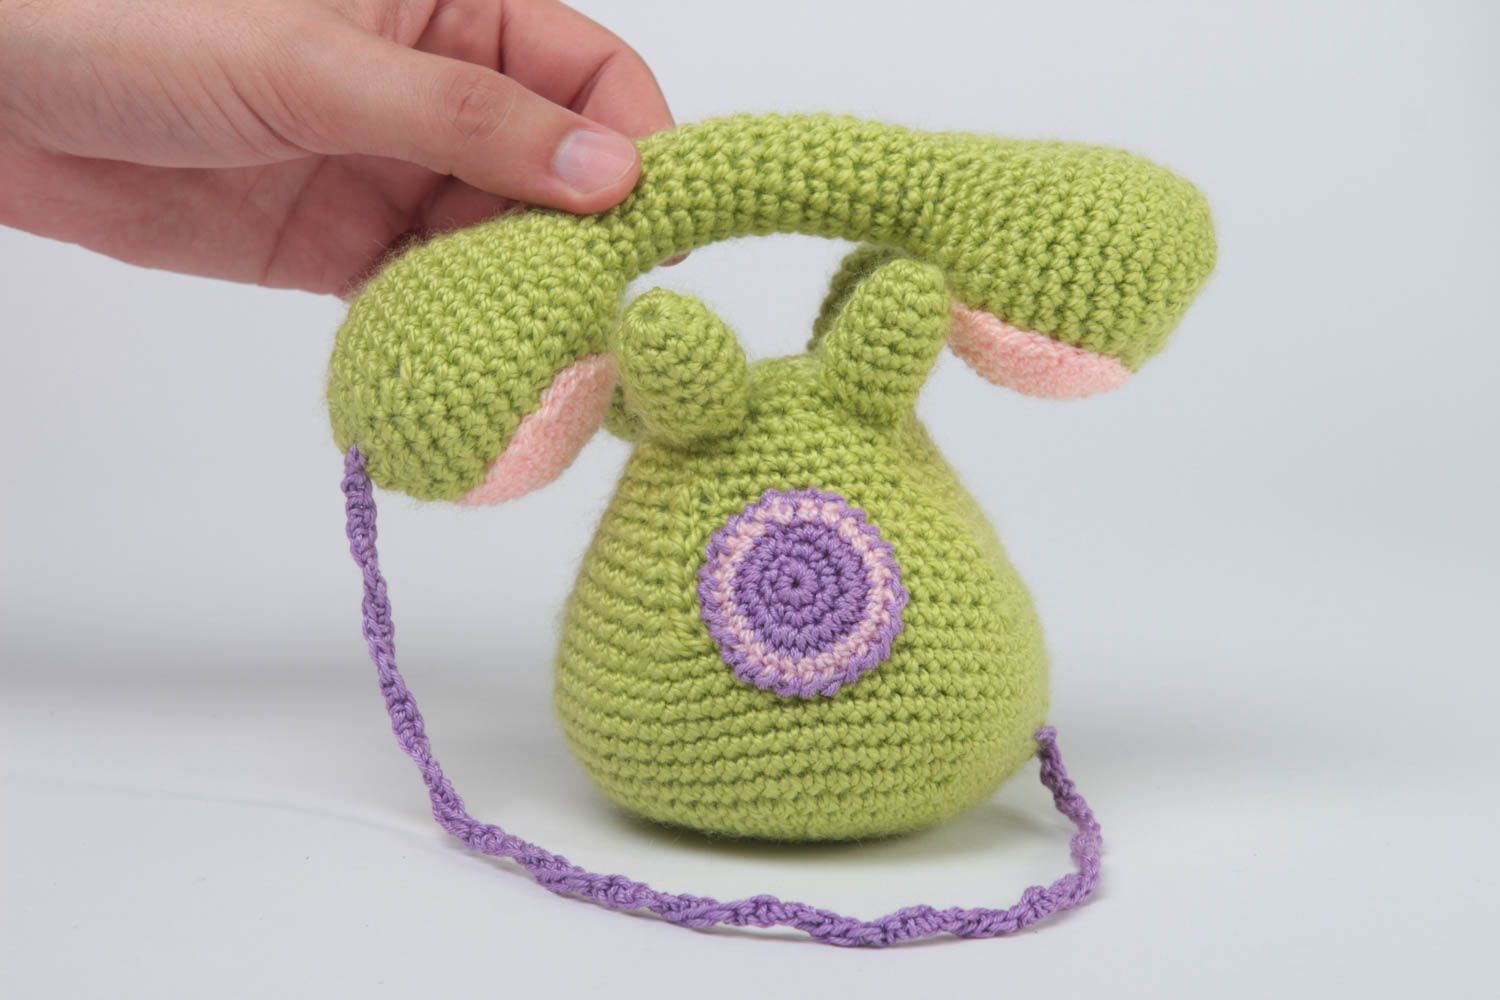 Handmade crocheted toy for children nursery decor stuffed toy for babies photo 5